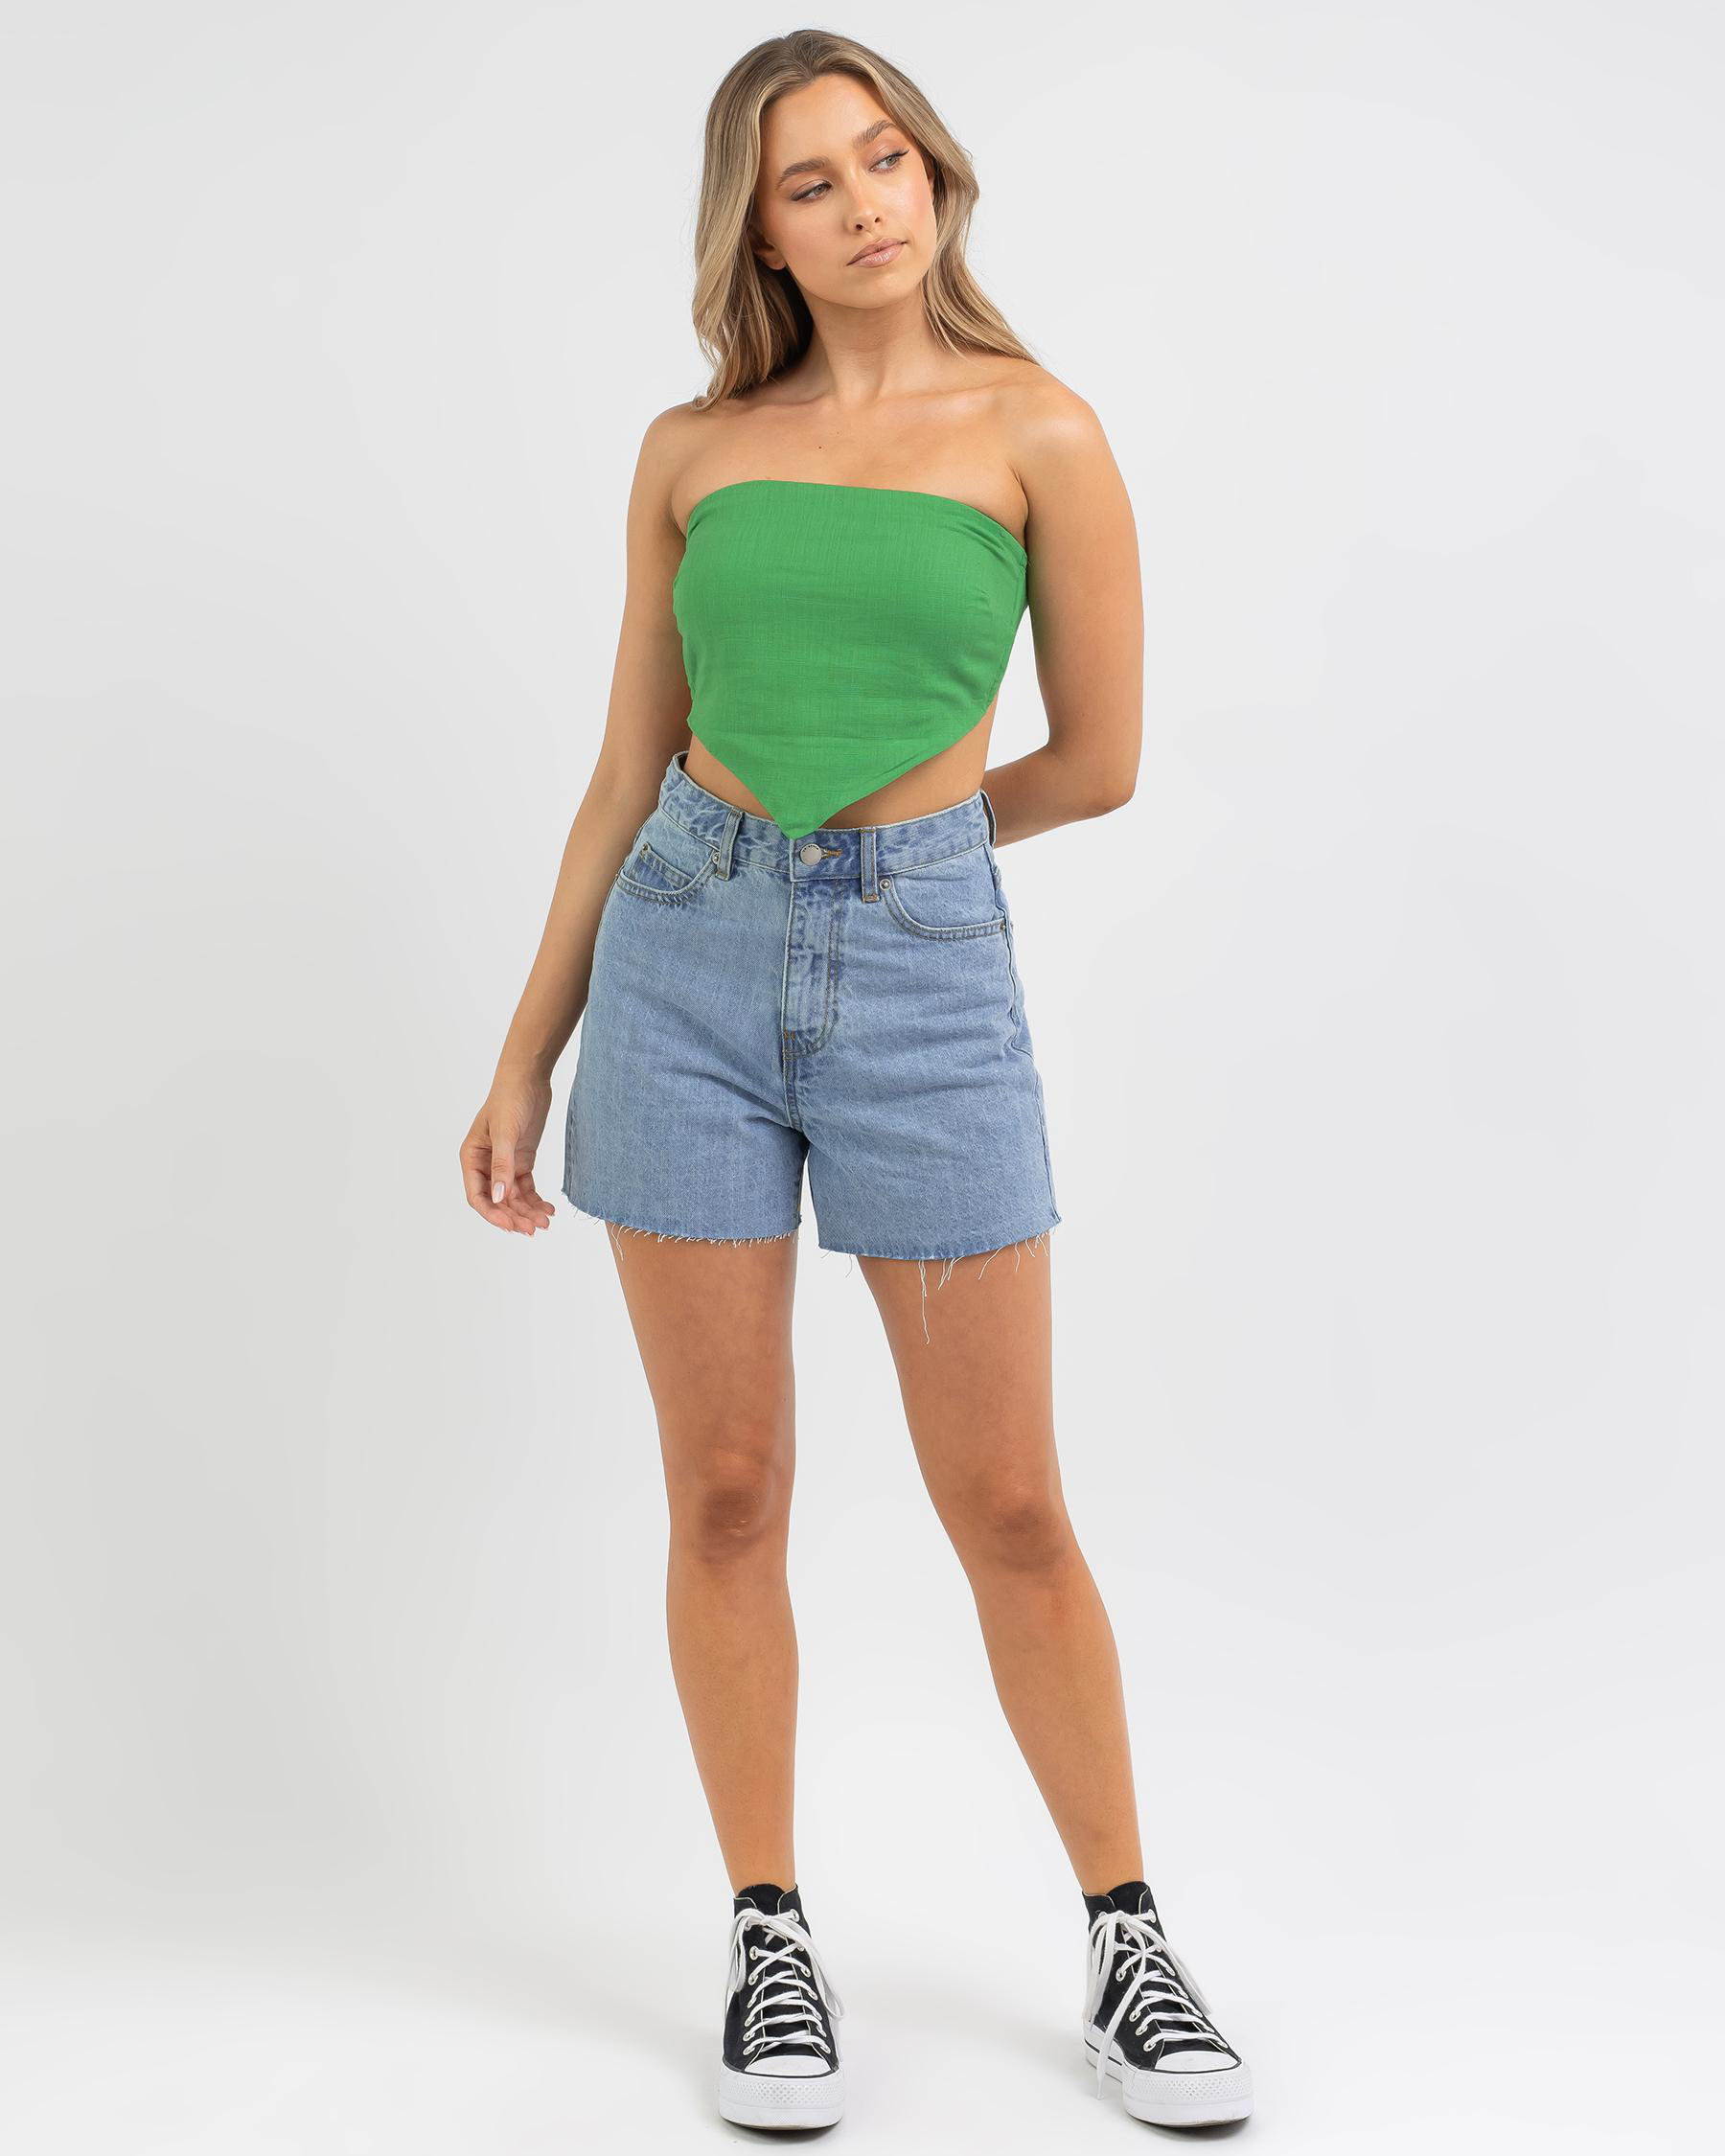 Mooloola Sandro Tube Top In Bright Green - Fast Shipping & Easy Returns ...